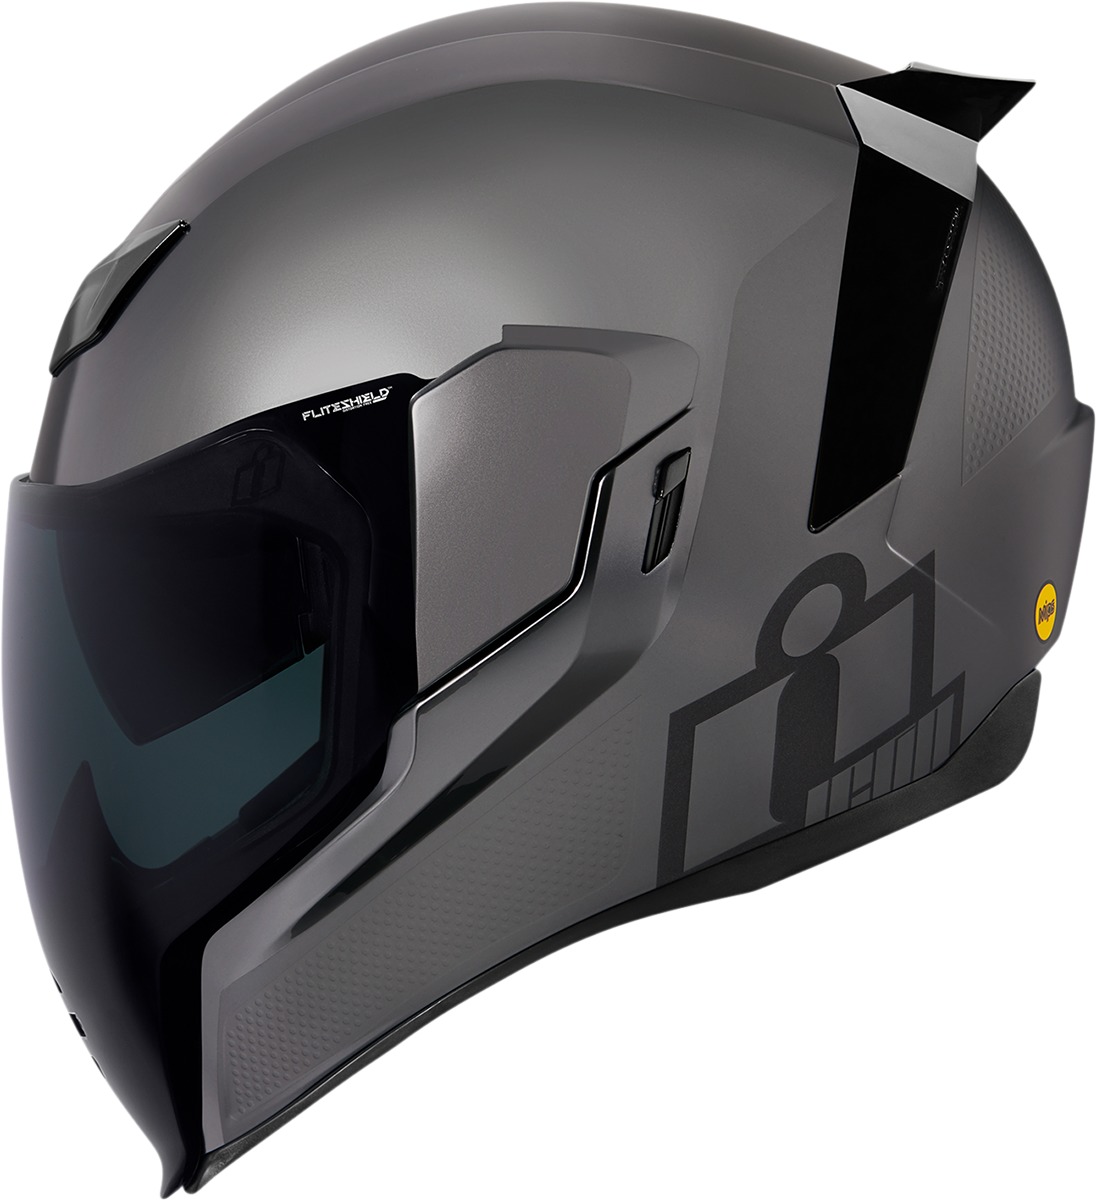 Silver Airflite Jewel MIPS Motorcycle Helmet - Small - Meets ECE 22.05 and DOT FMVSS-218 Standards - Click Image to Close